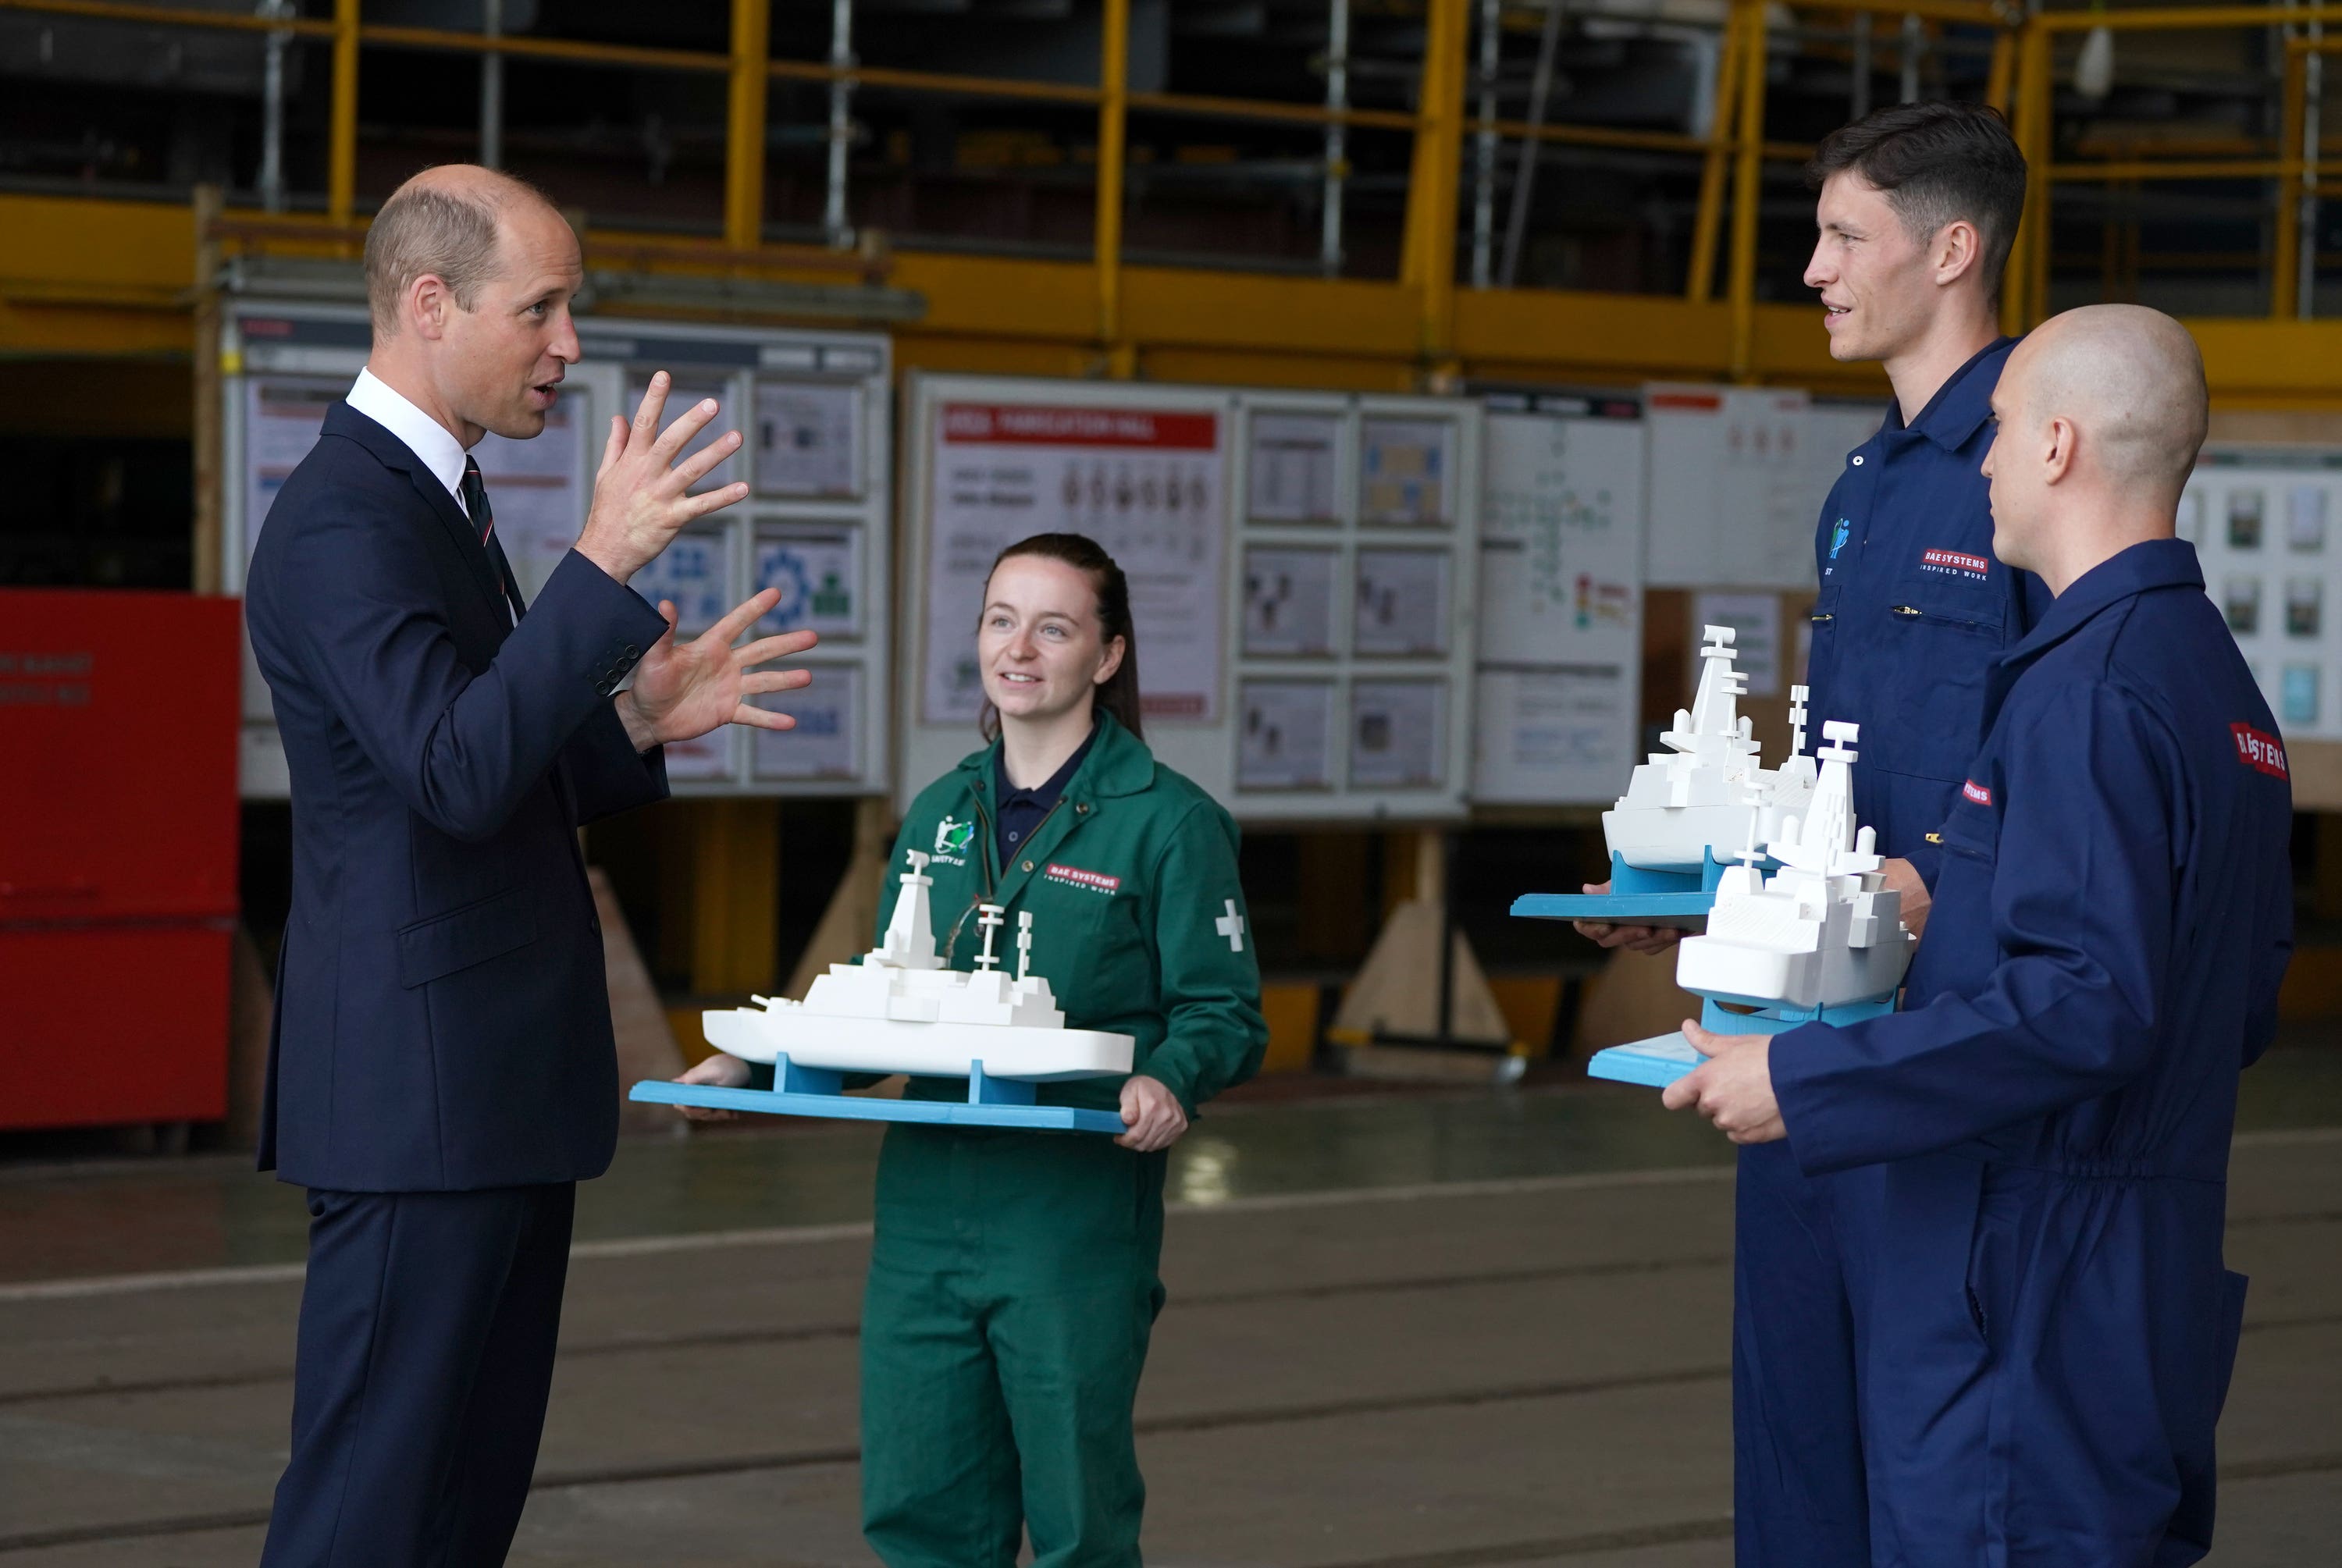 Models of warships were given to William as gifts.